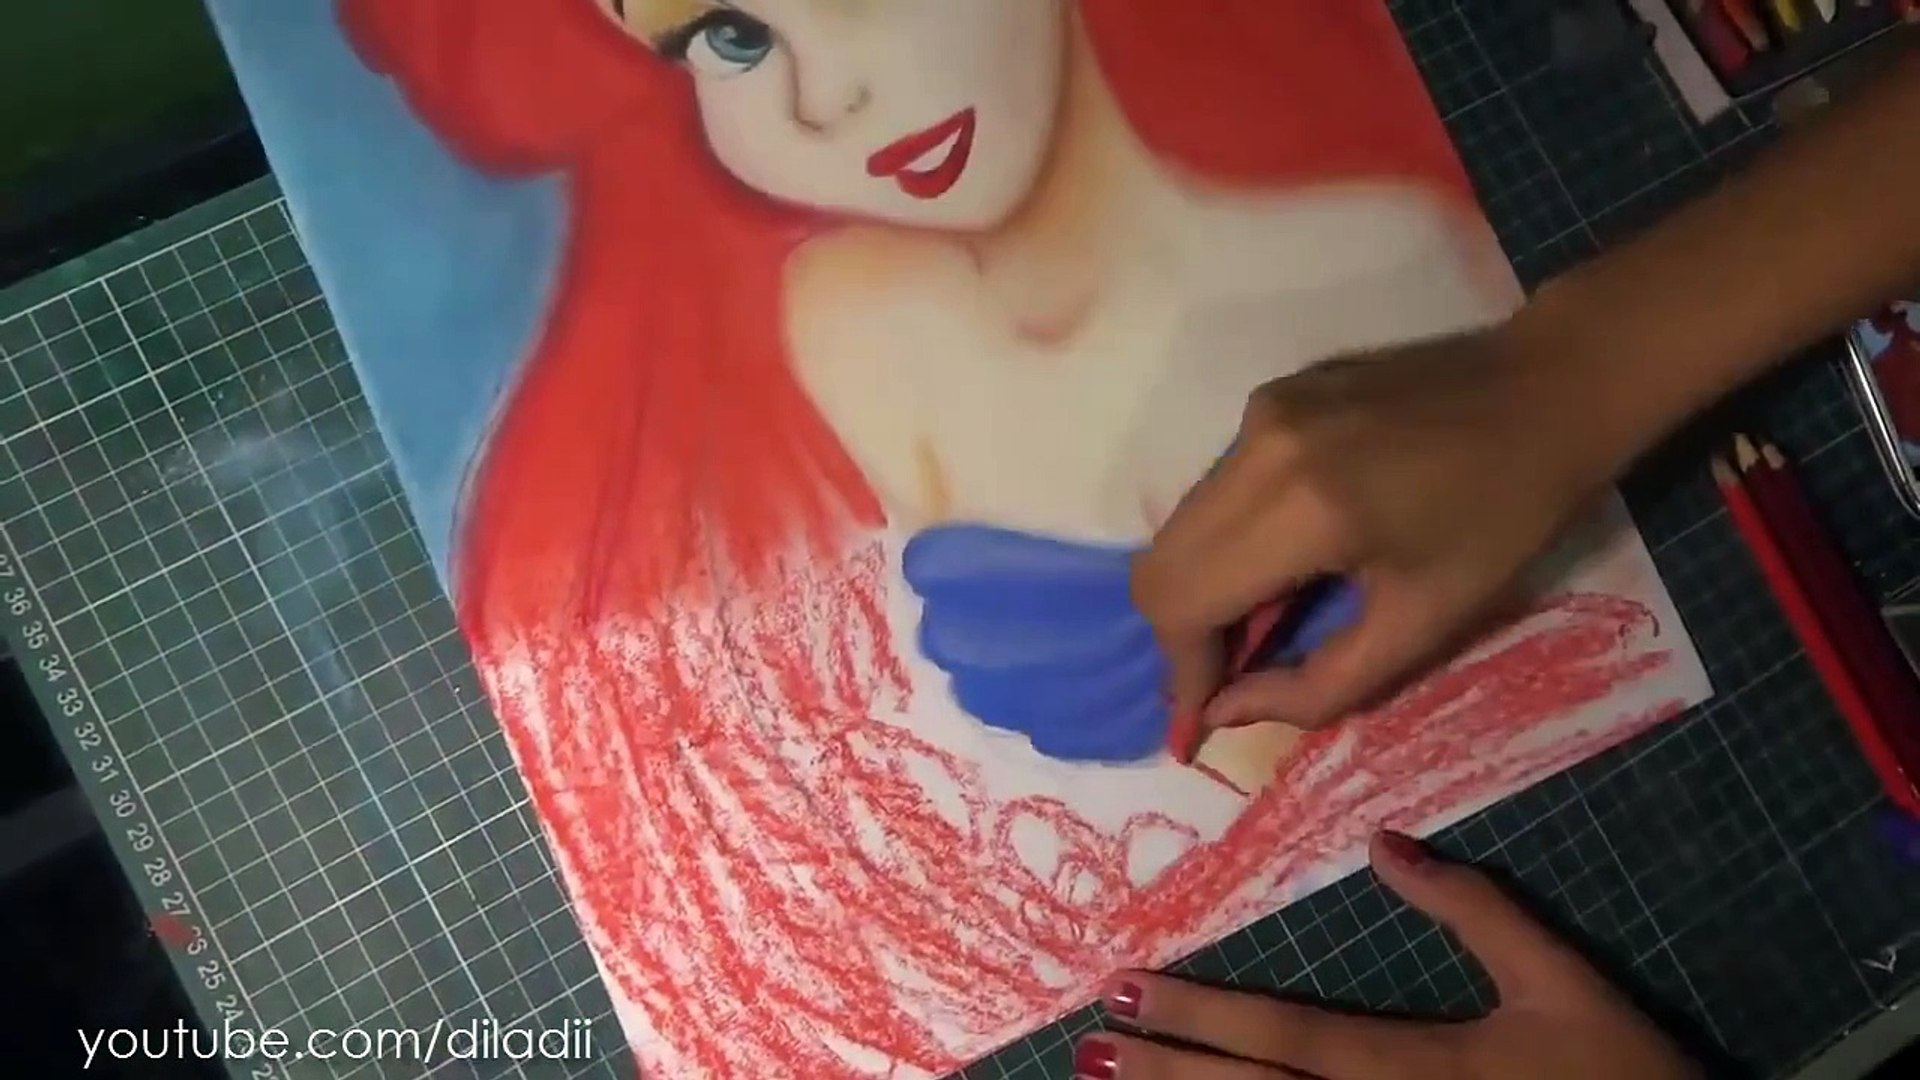 Speed Drawing Ariel The Little Mermaid Diana Diaz Video Images, Photos, Reviews